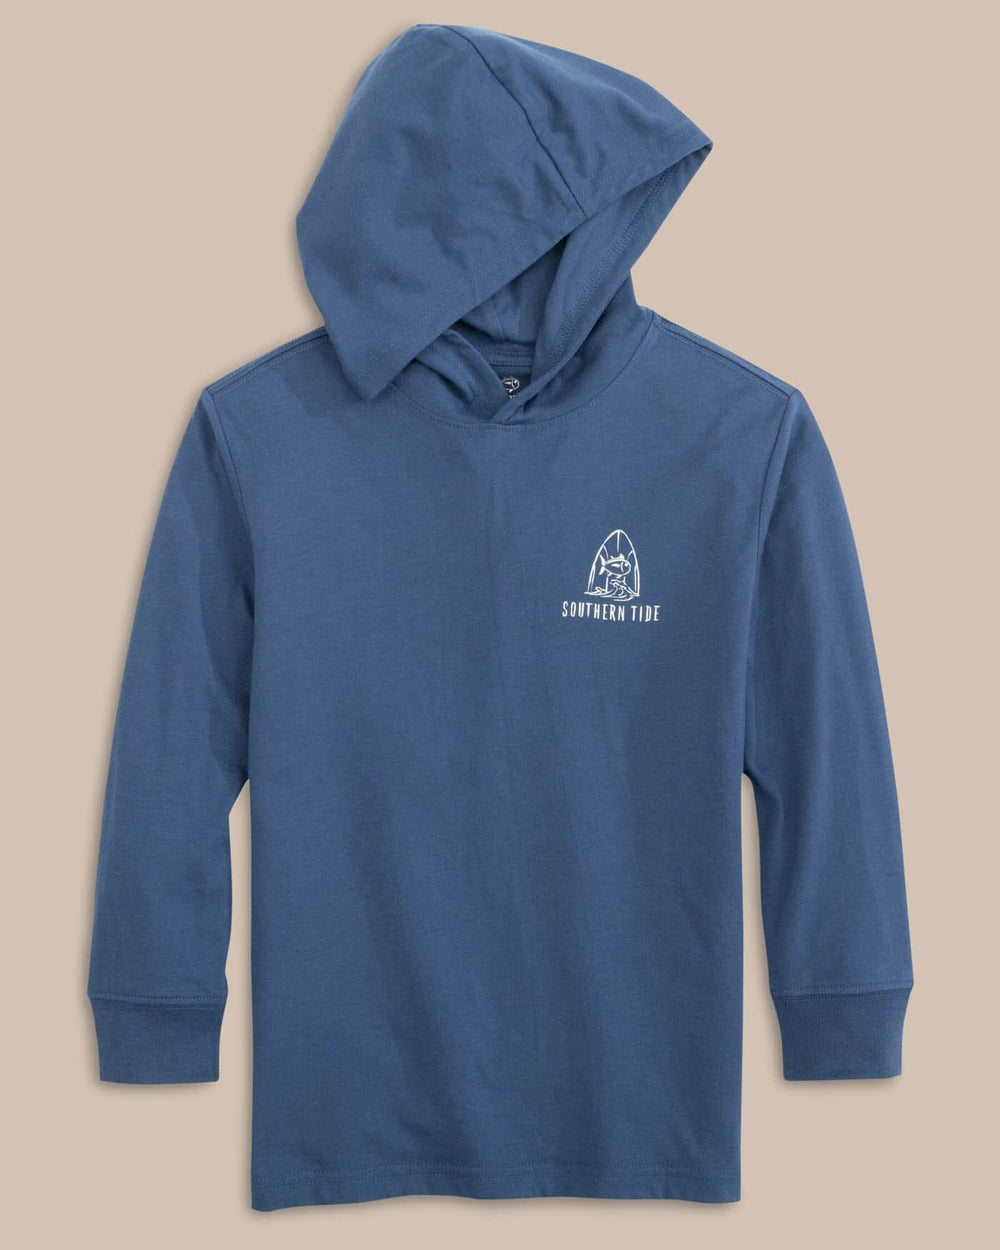 The front view of the Southern Tide Kid's Surfing Skipjack Hoodie T-shirt by Southern Tide - Aged Denim